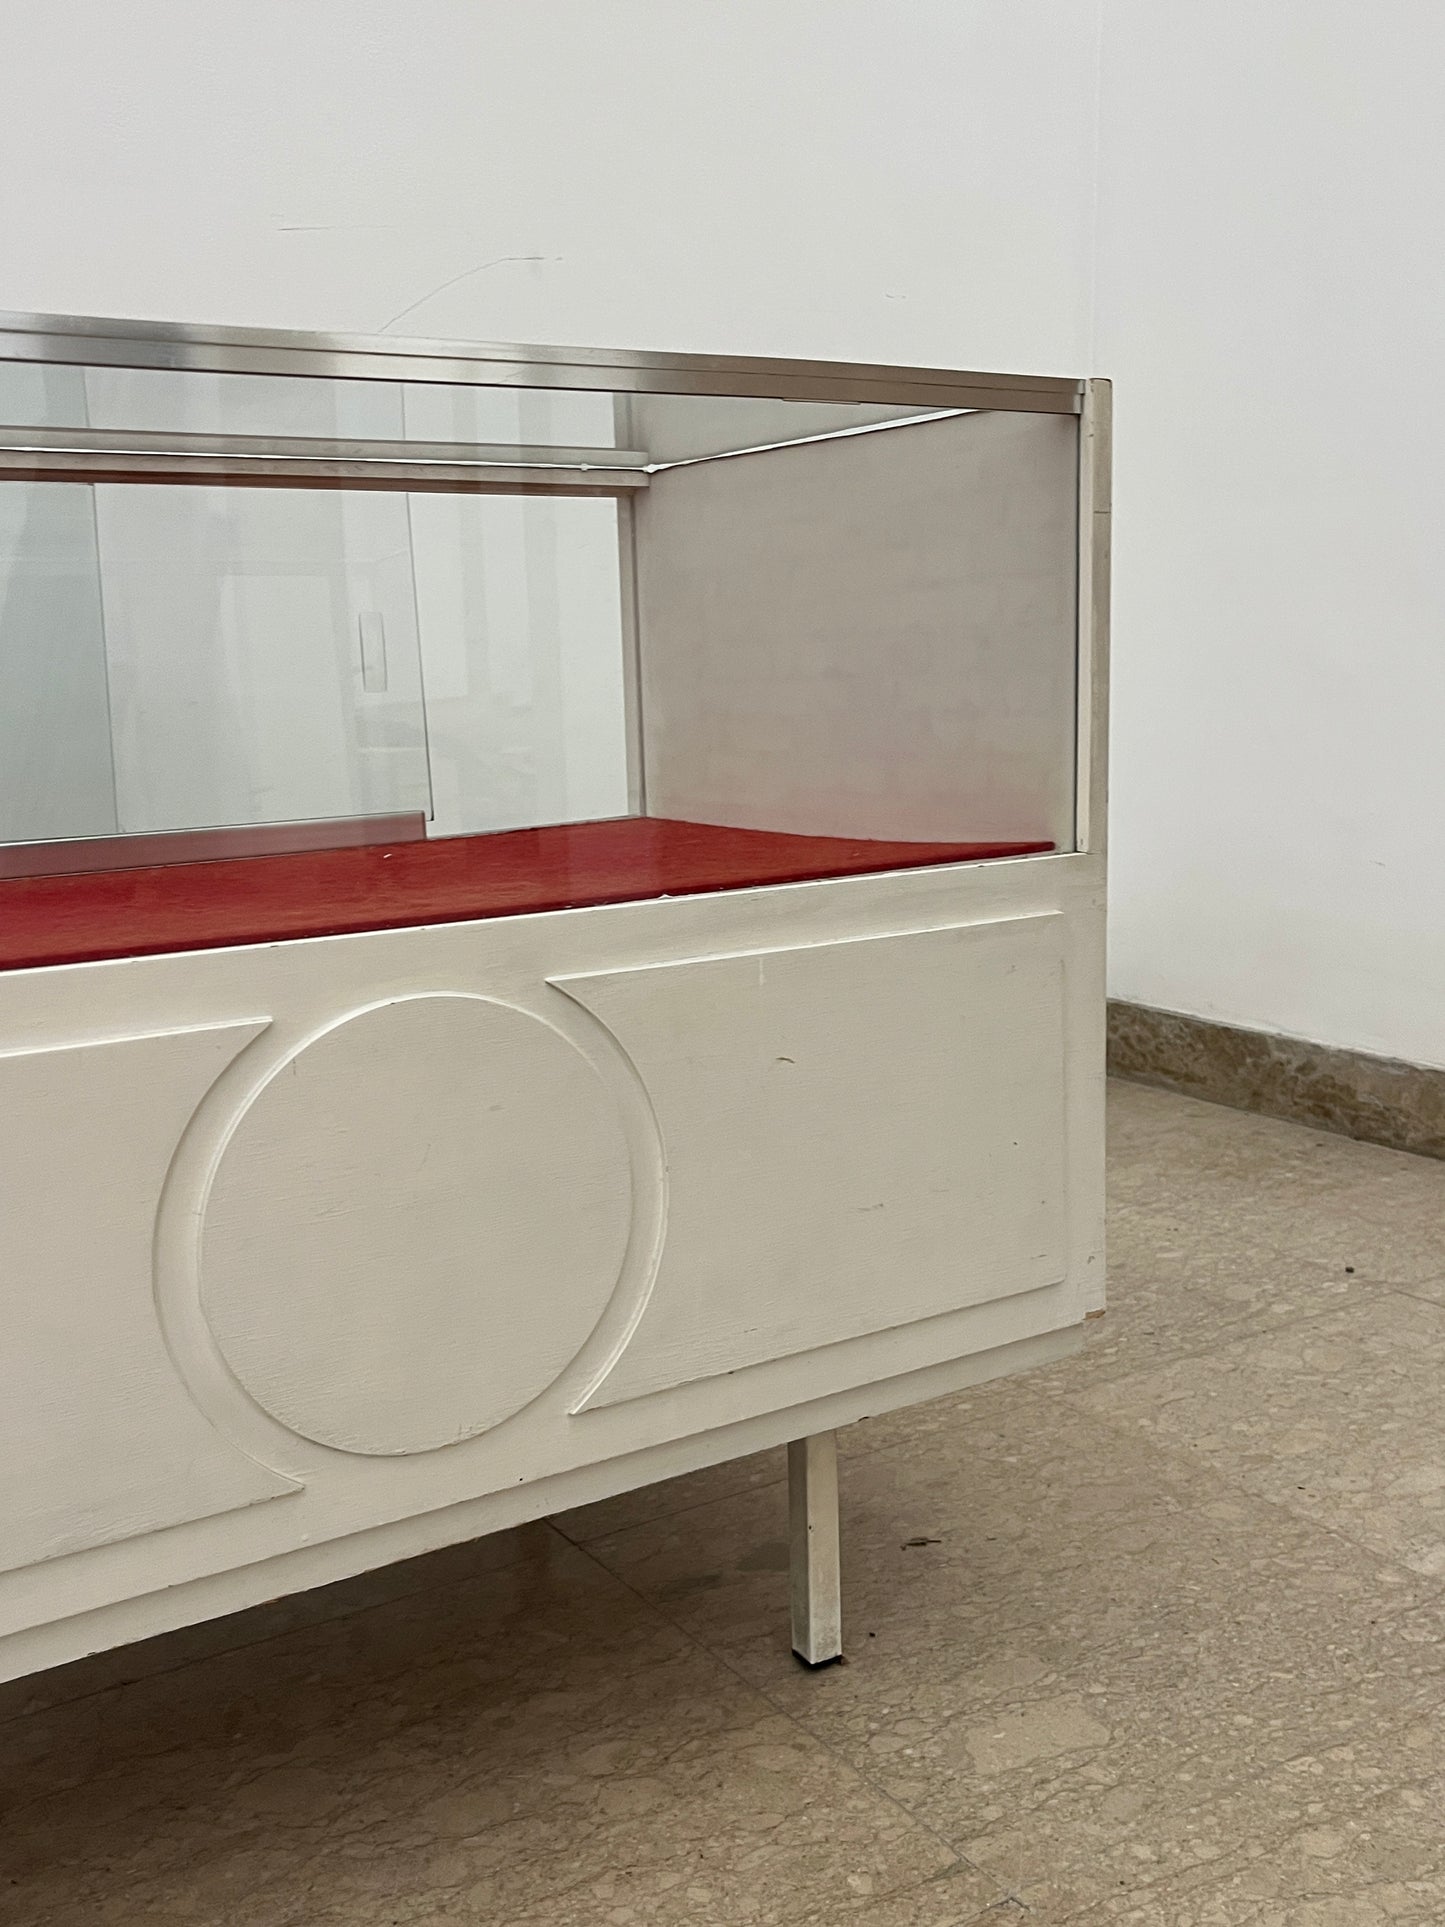 USED UP | Austrian Pavilion │ Diaper changing table, 2.2.4